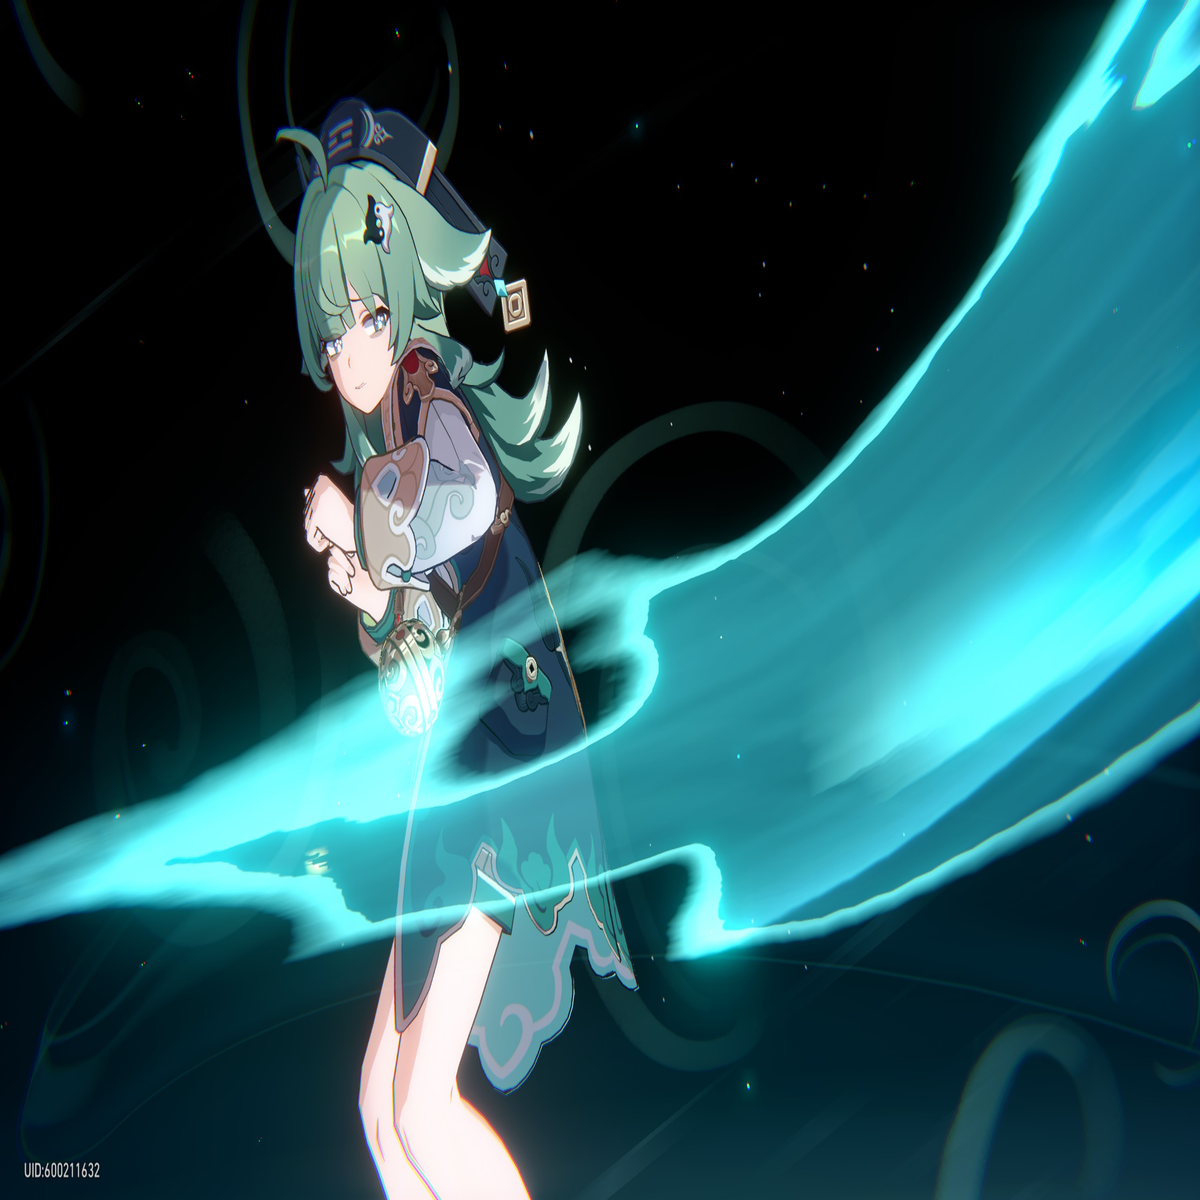 Huohuo Teased as a New Honkai: Star Rail Character for 1.5 - Siliconera